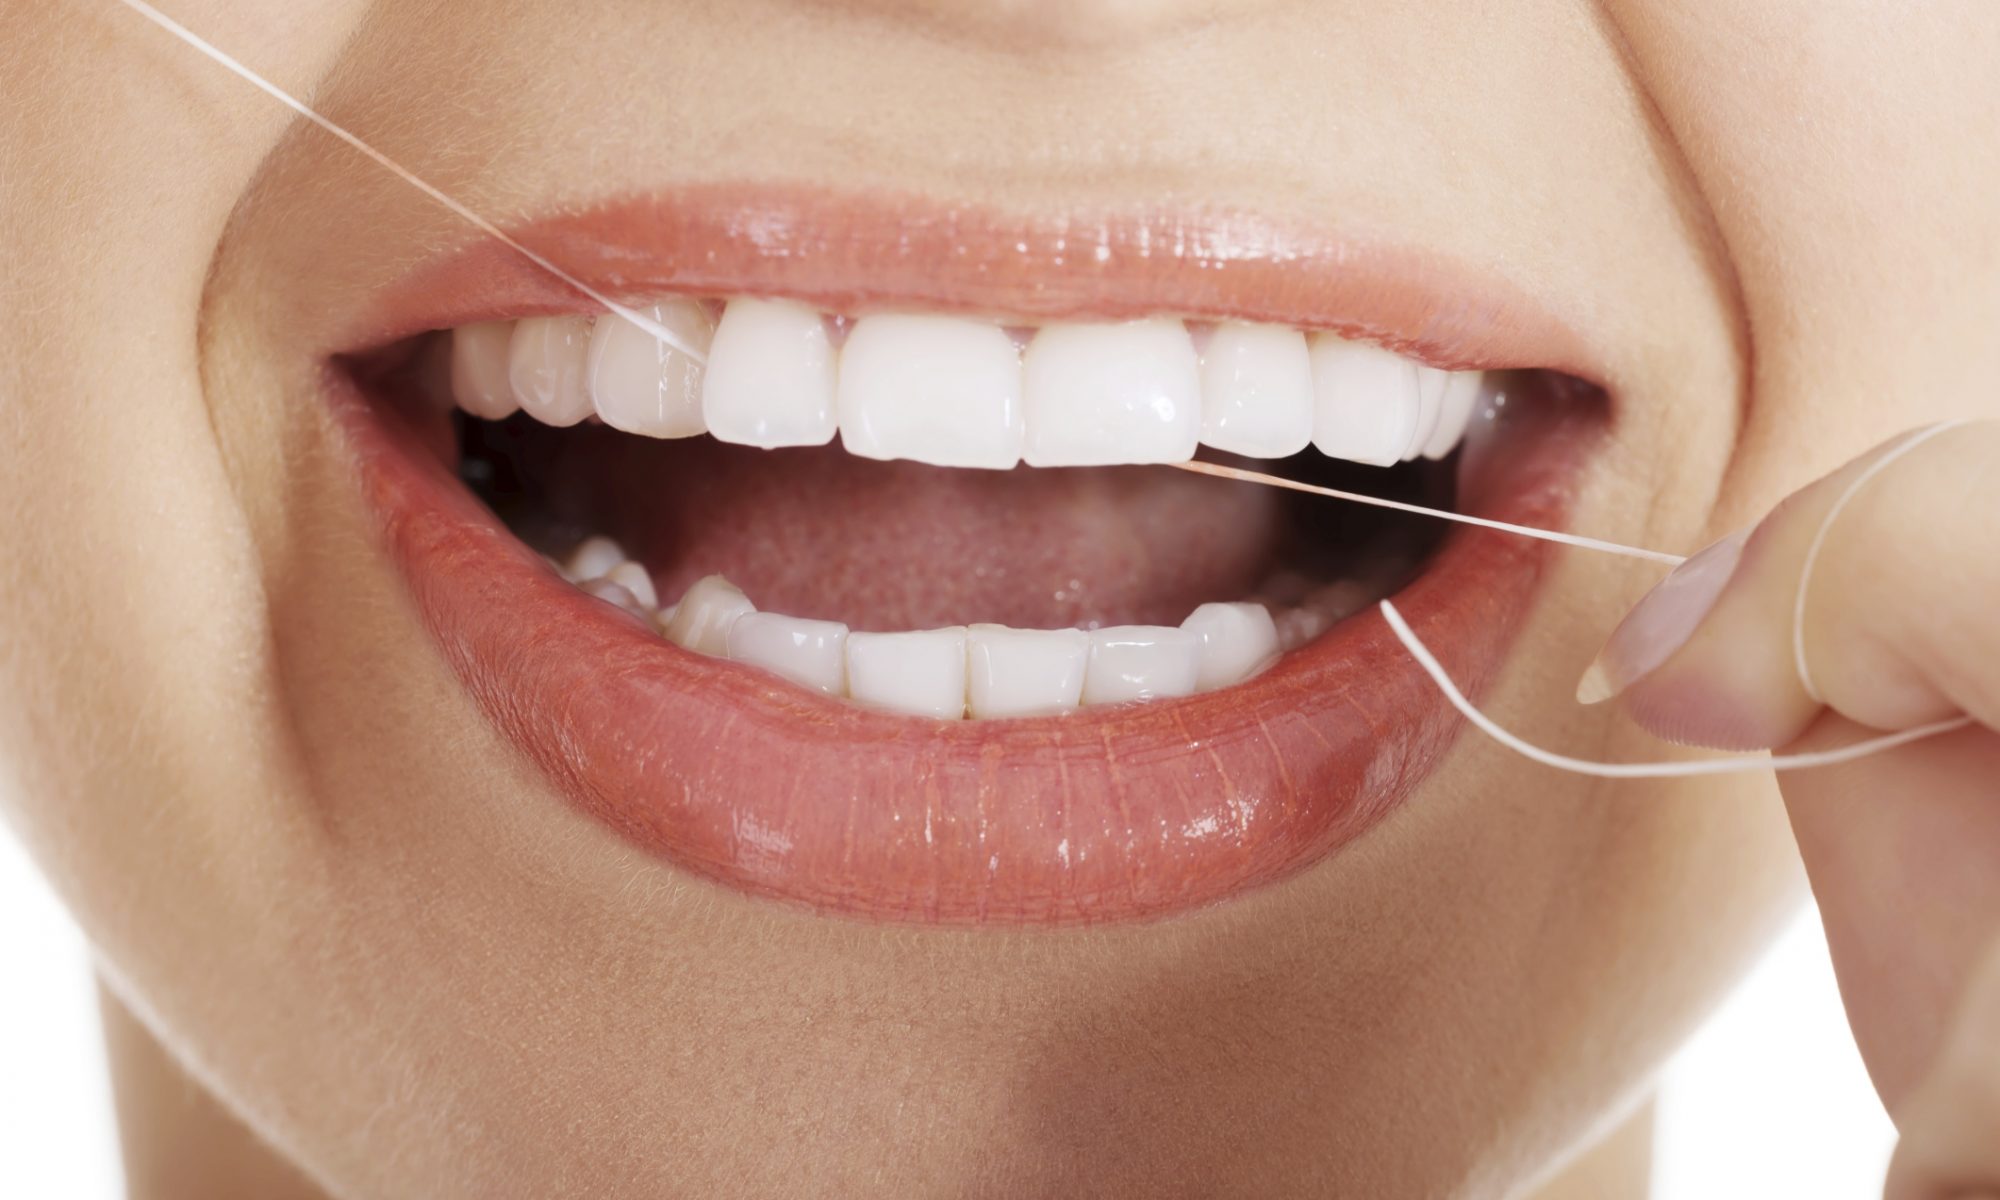 A woman flossing to show that flossing is an important aspect of oral care